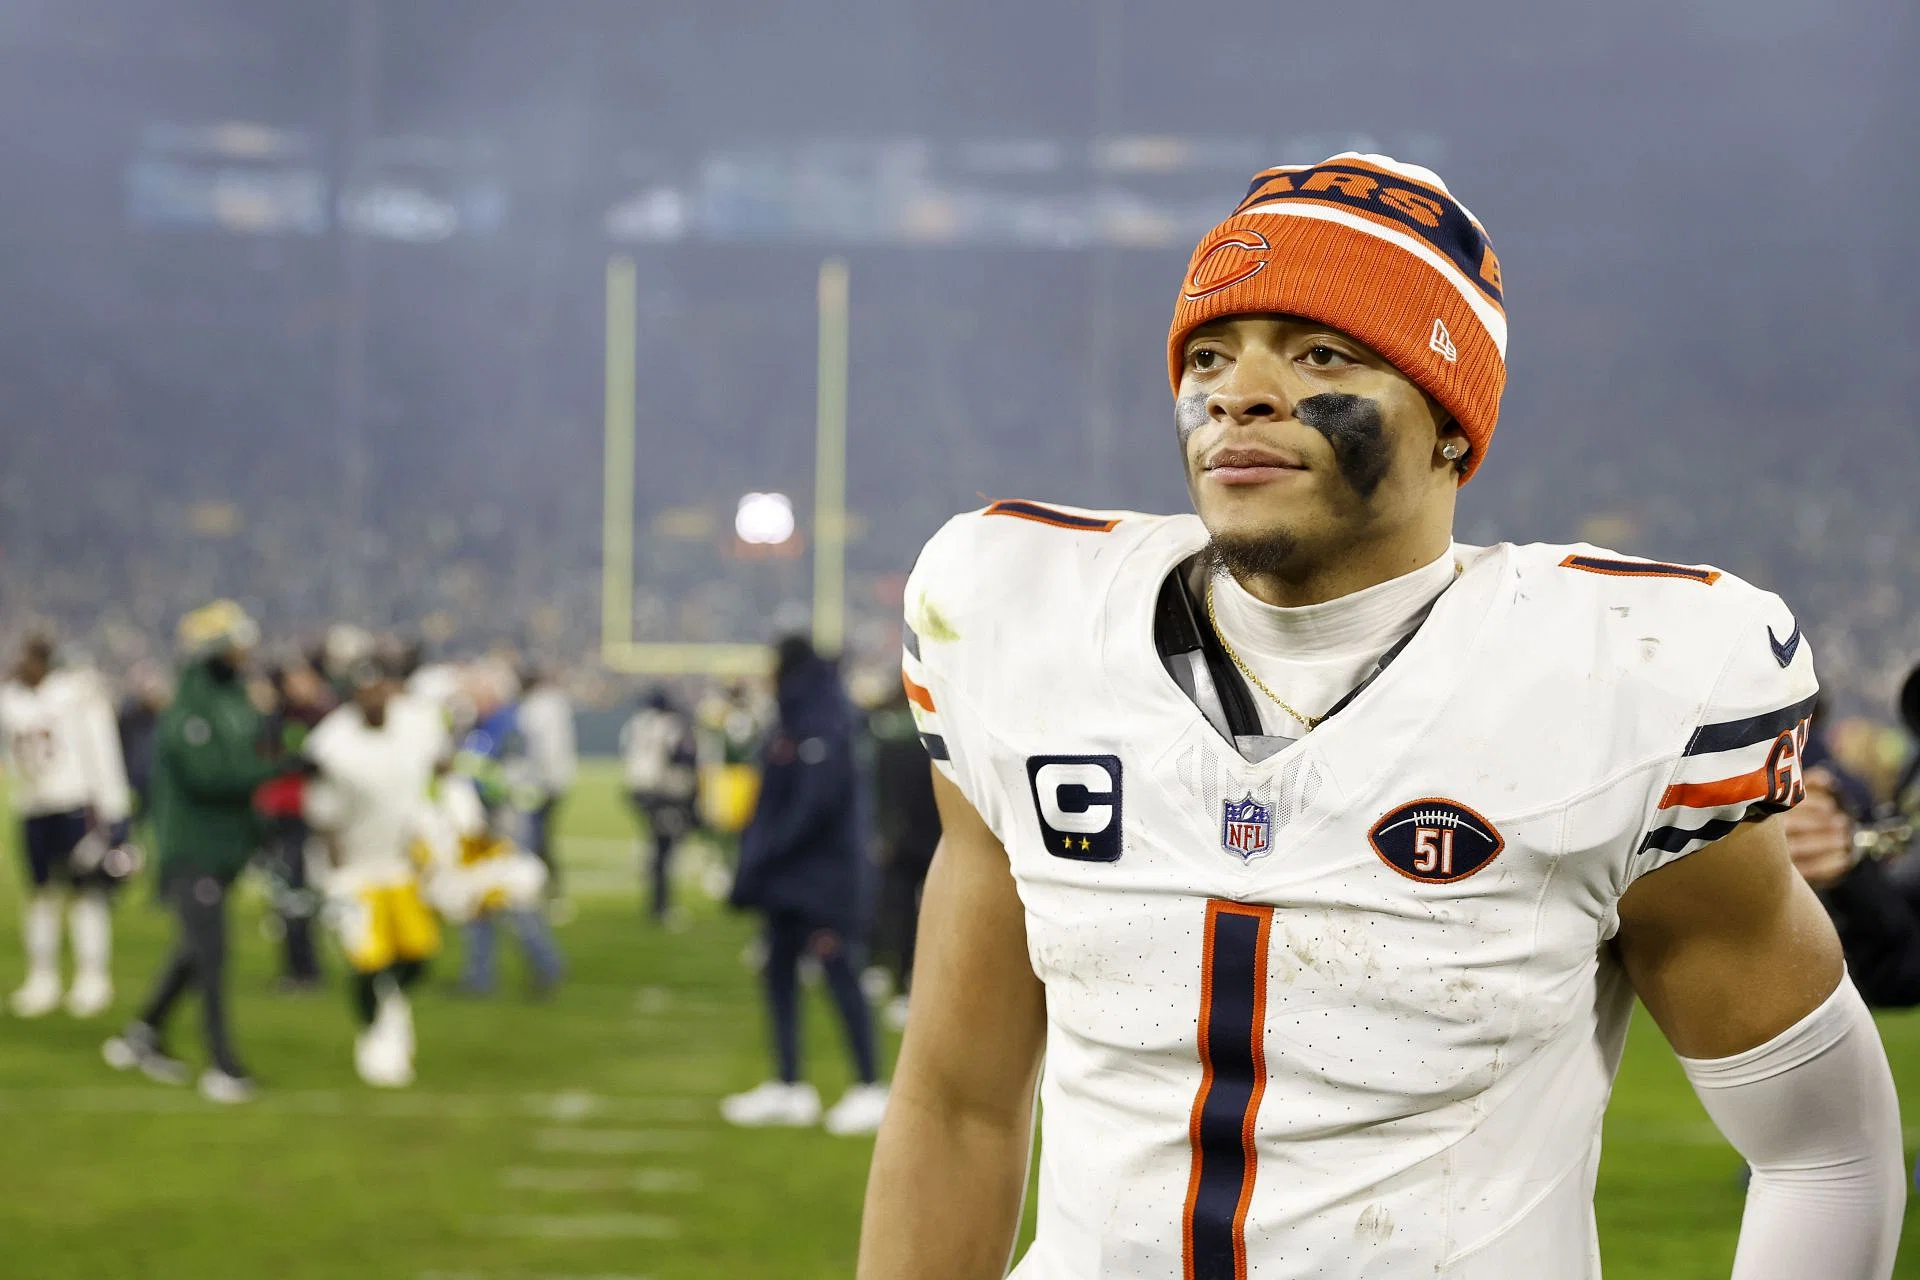 Analyzing Justin Fields' NFL trajectory: Could the Chicago Bears quarterback join the ranks of Hall of Fame legends like Peyton Manning?